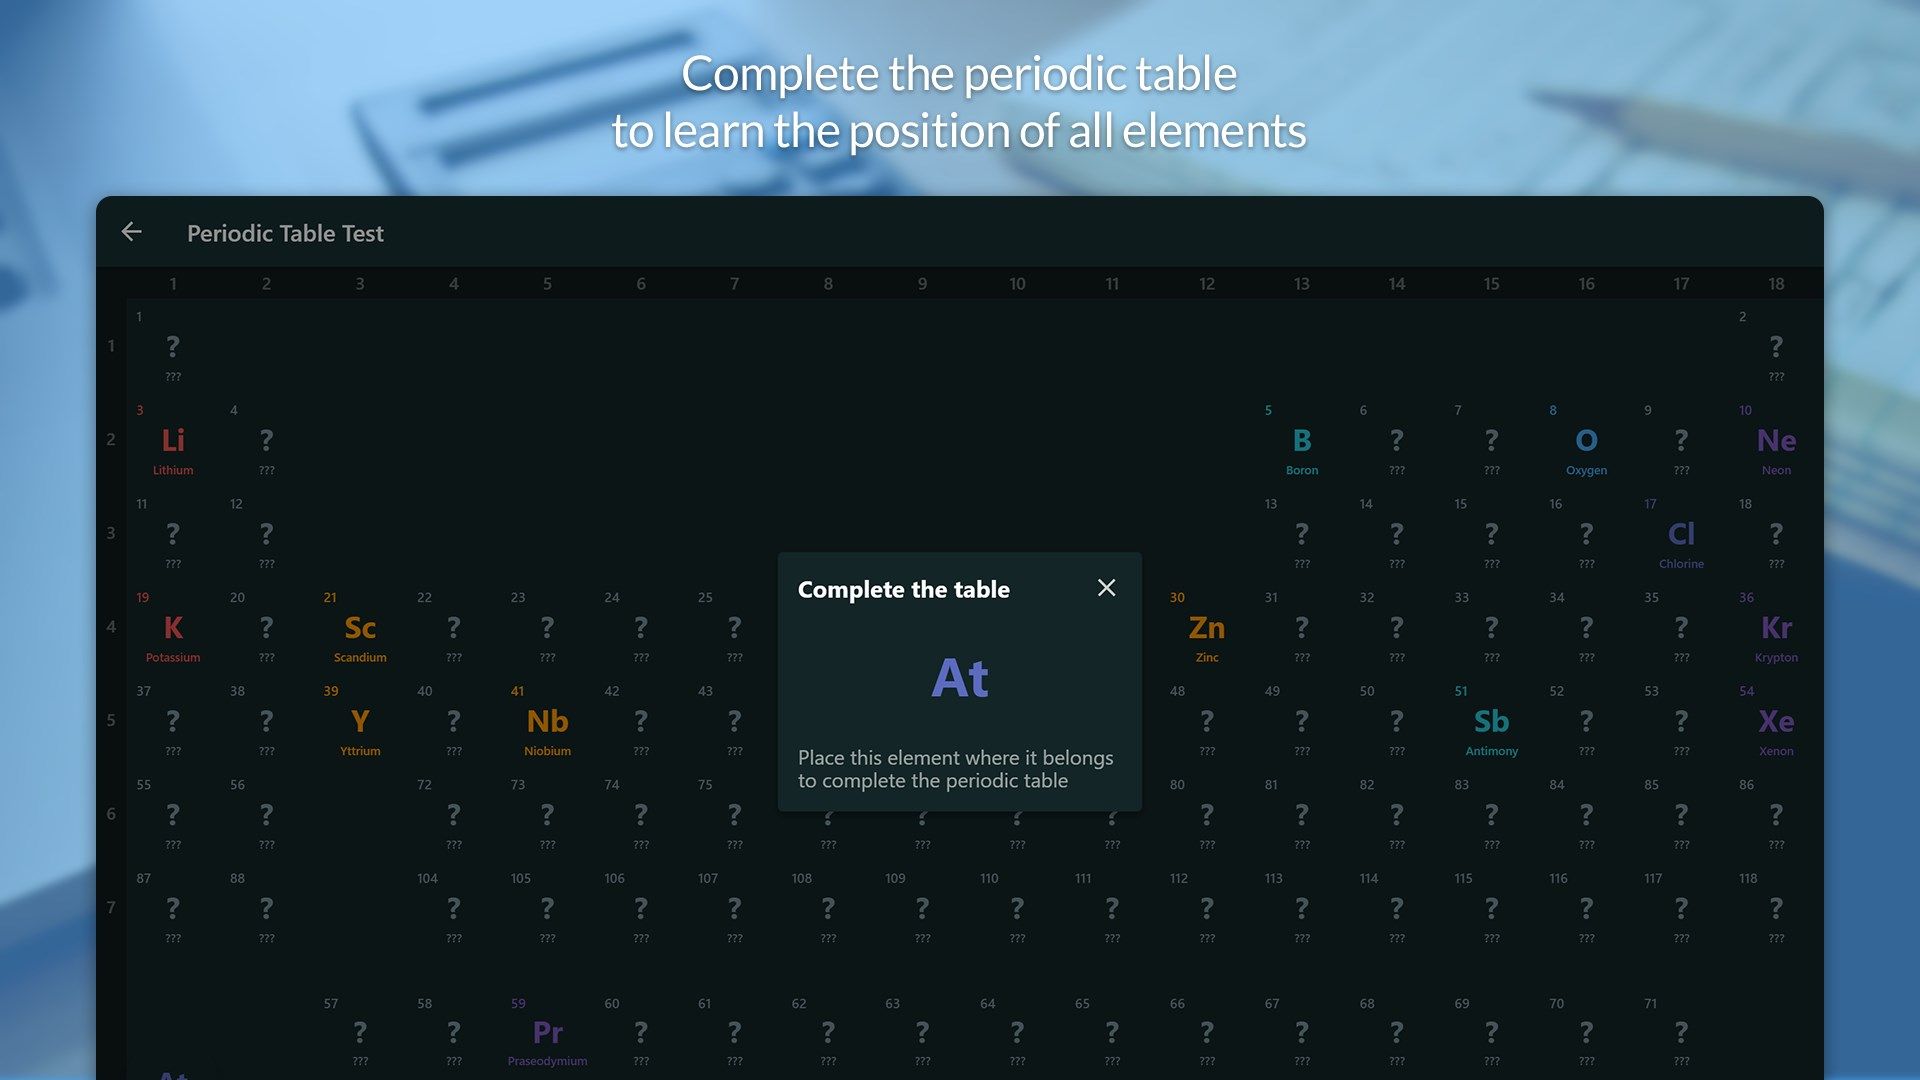 Complete the periodic table to learn the position of all elements